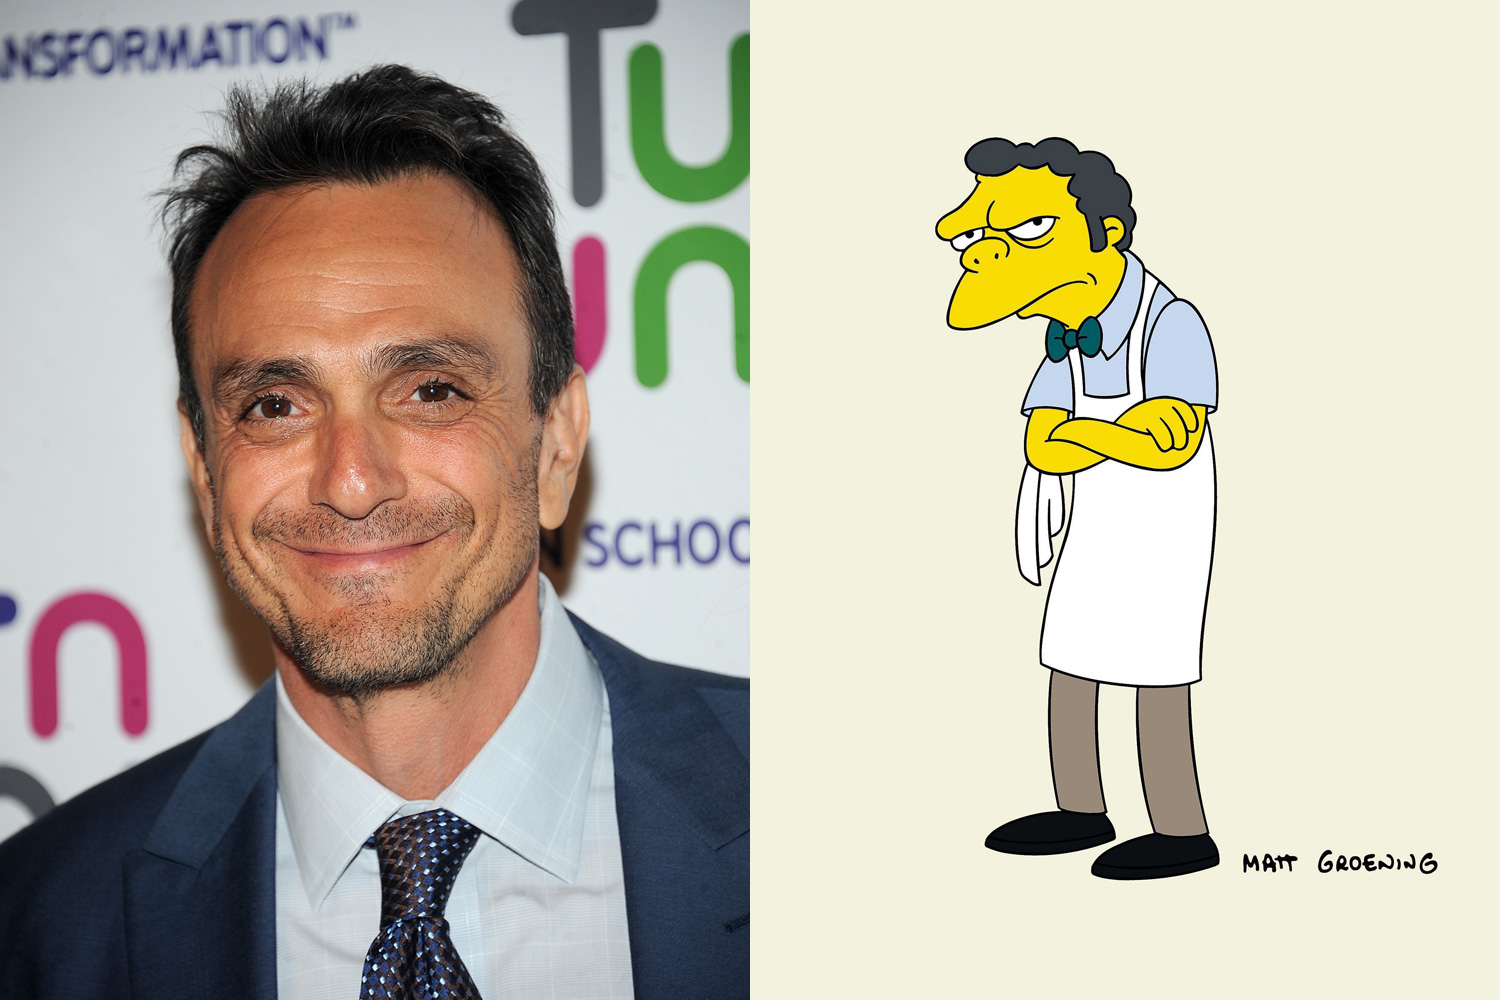 Hank Azaria plays the town barkeep, Moe Szyslak, as well as a wide cast of male characters ranging from Chief Wiggum and Apu to Duffman (can't breathe! oh no!). (Brad Barket—Getty Images; Fox)